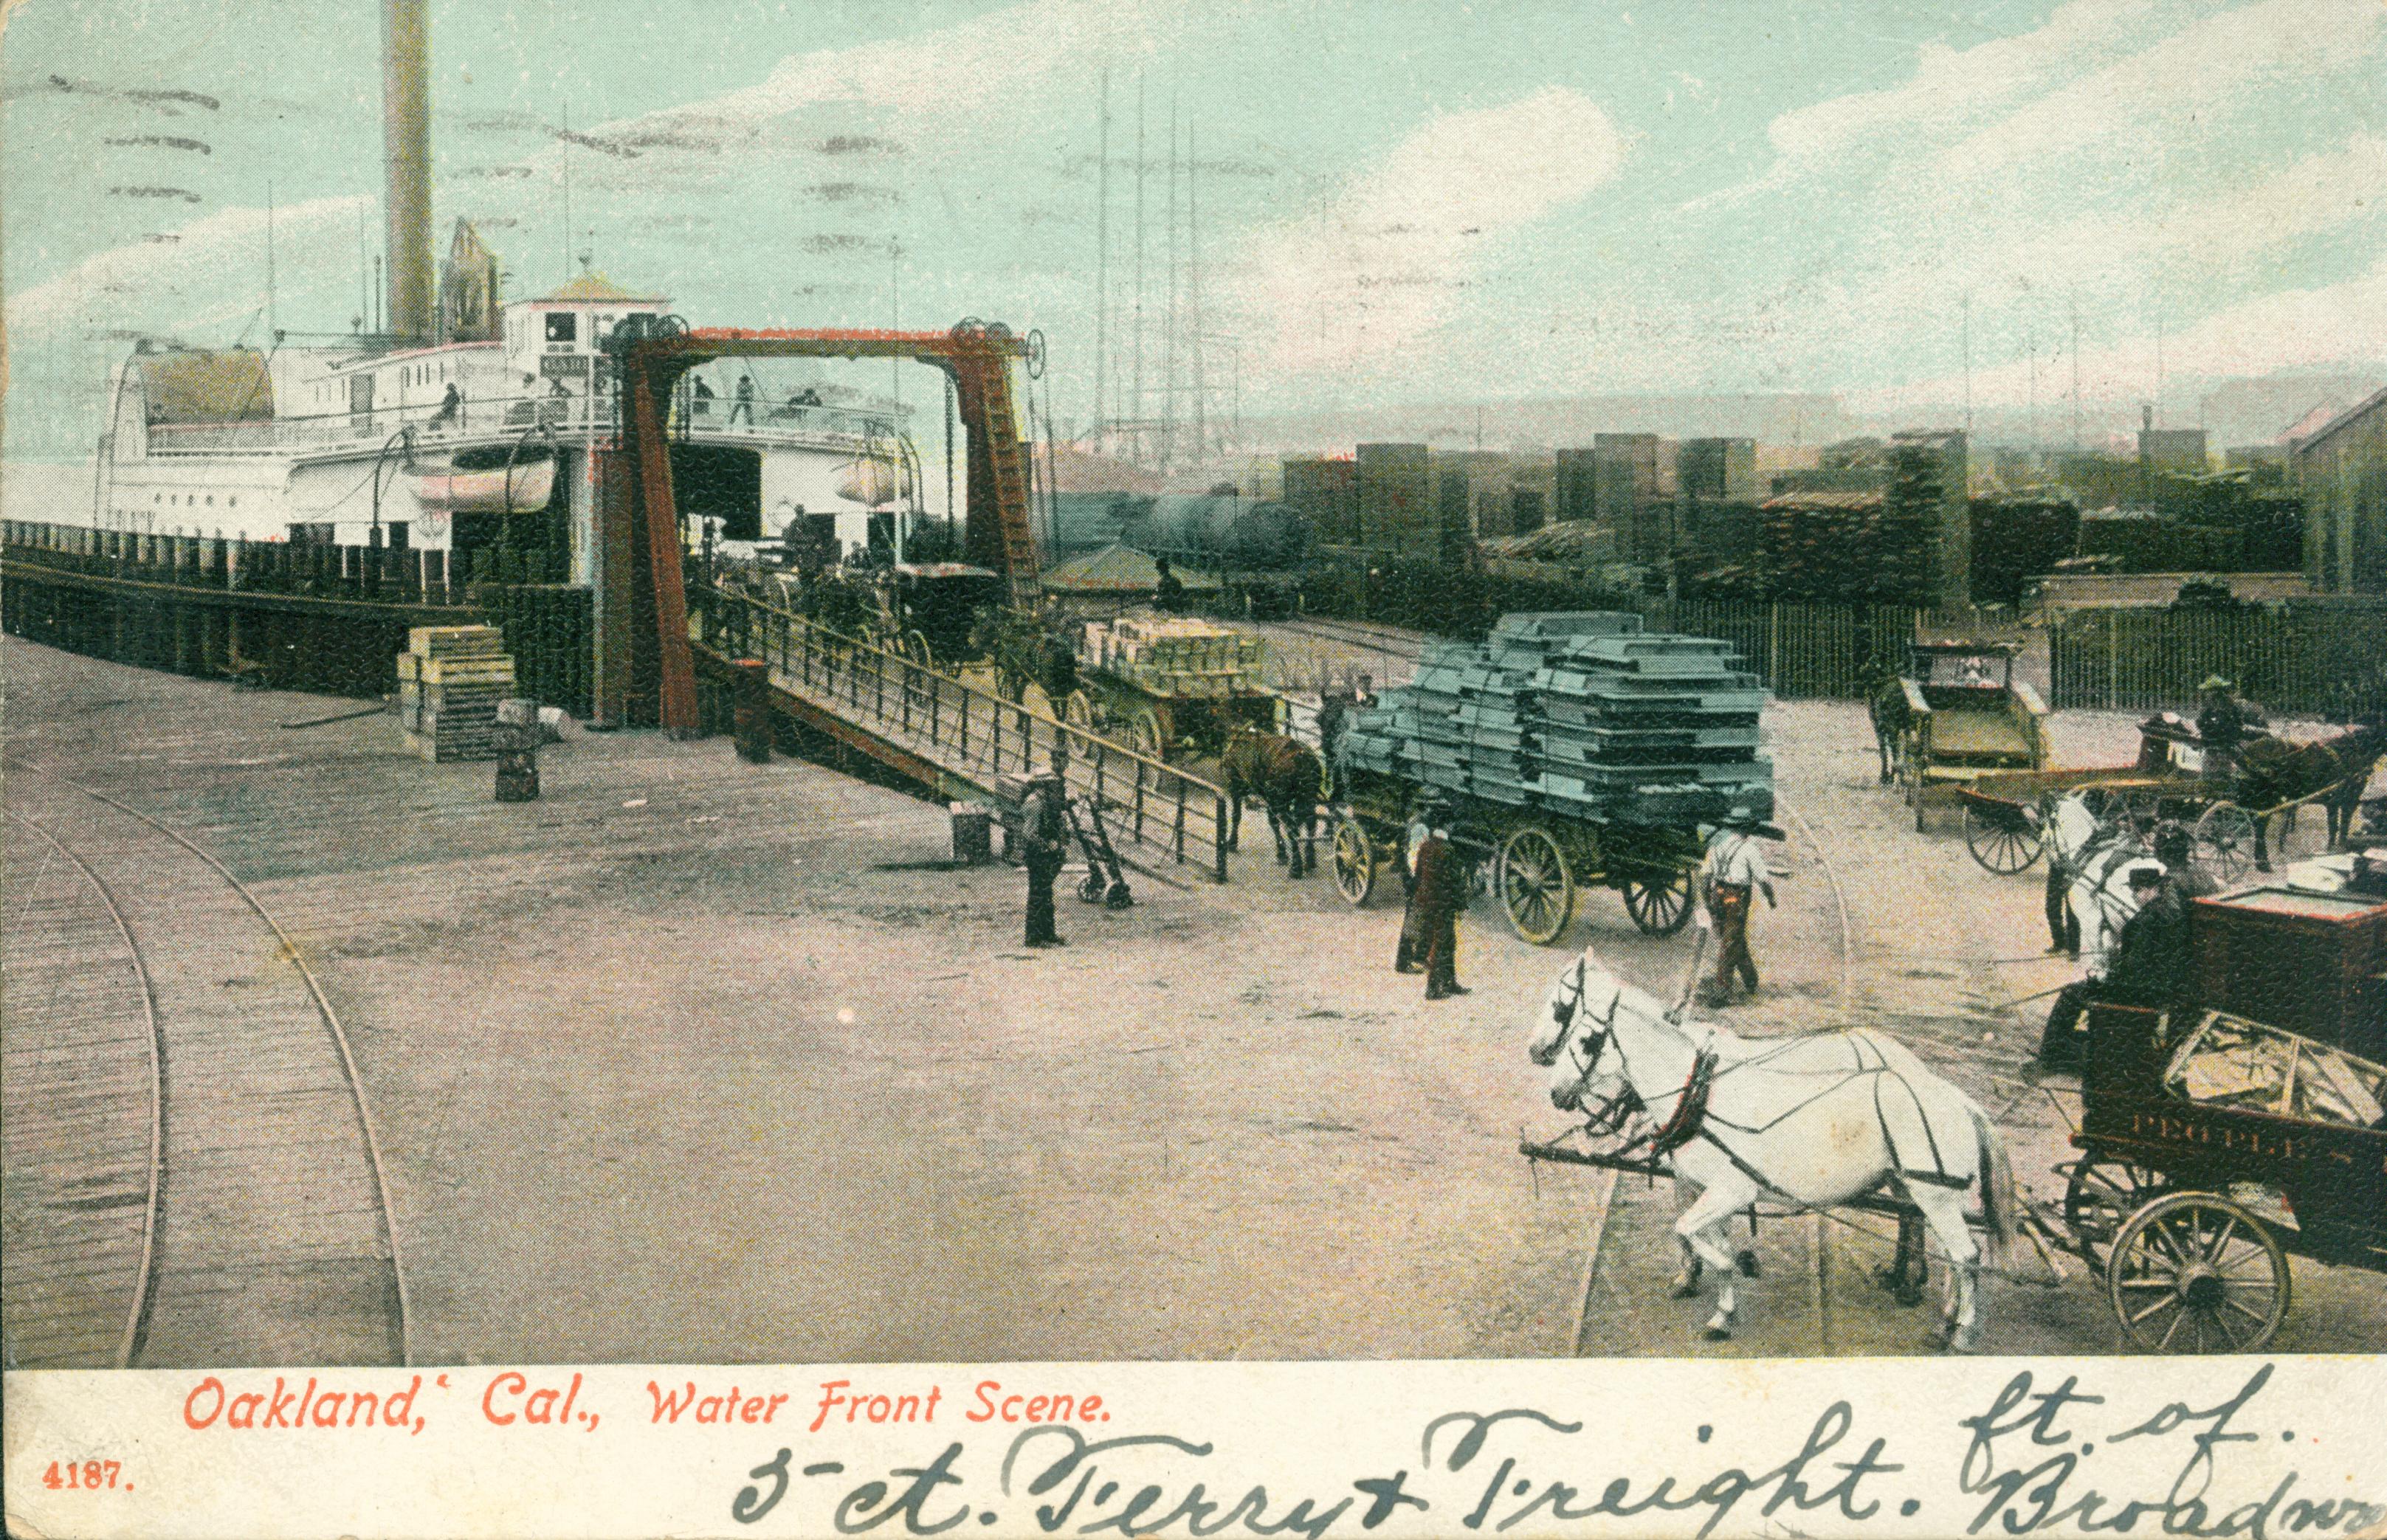 Shows several carts and wagons loading onto a ferry